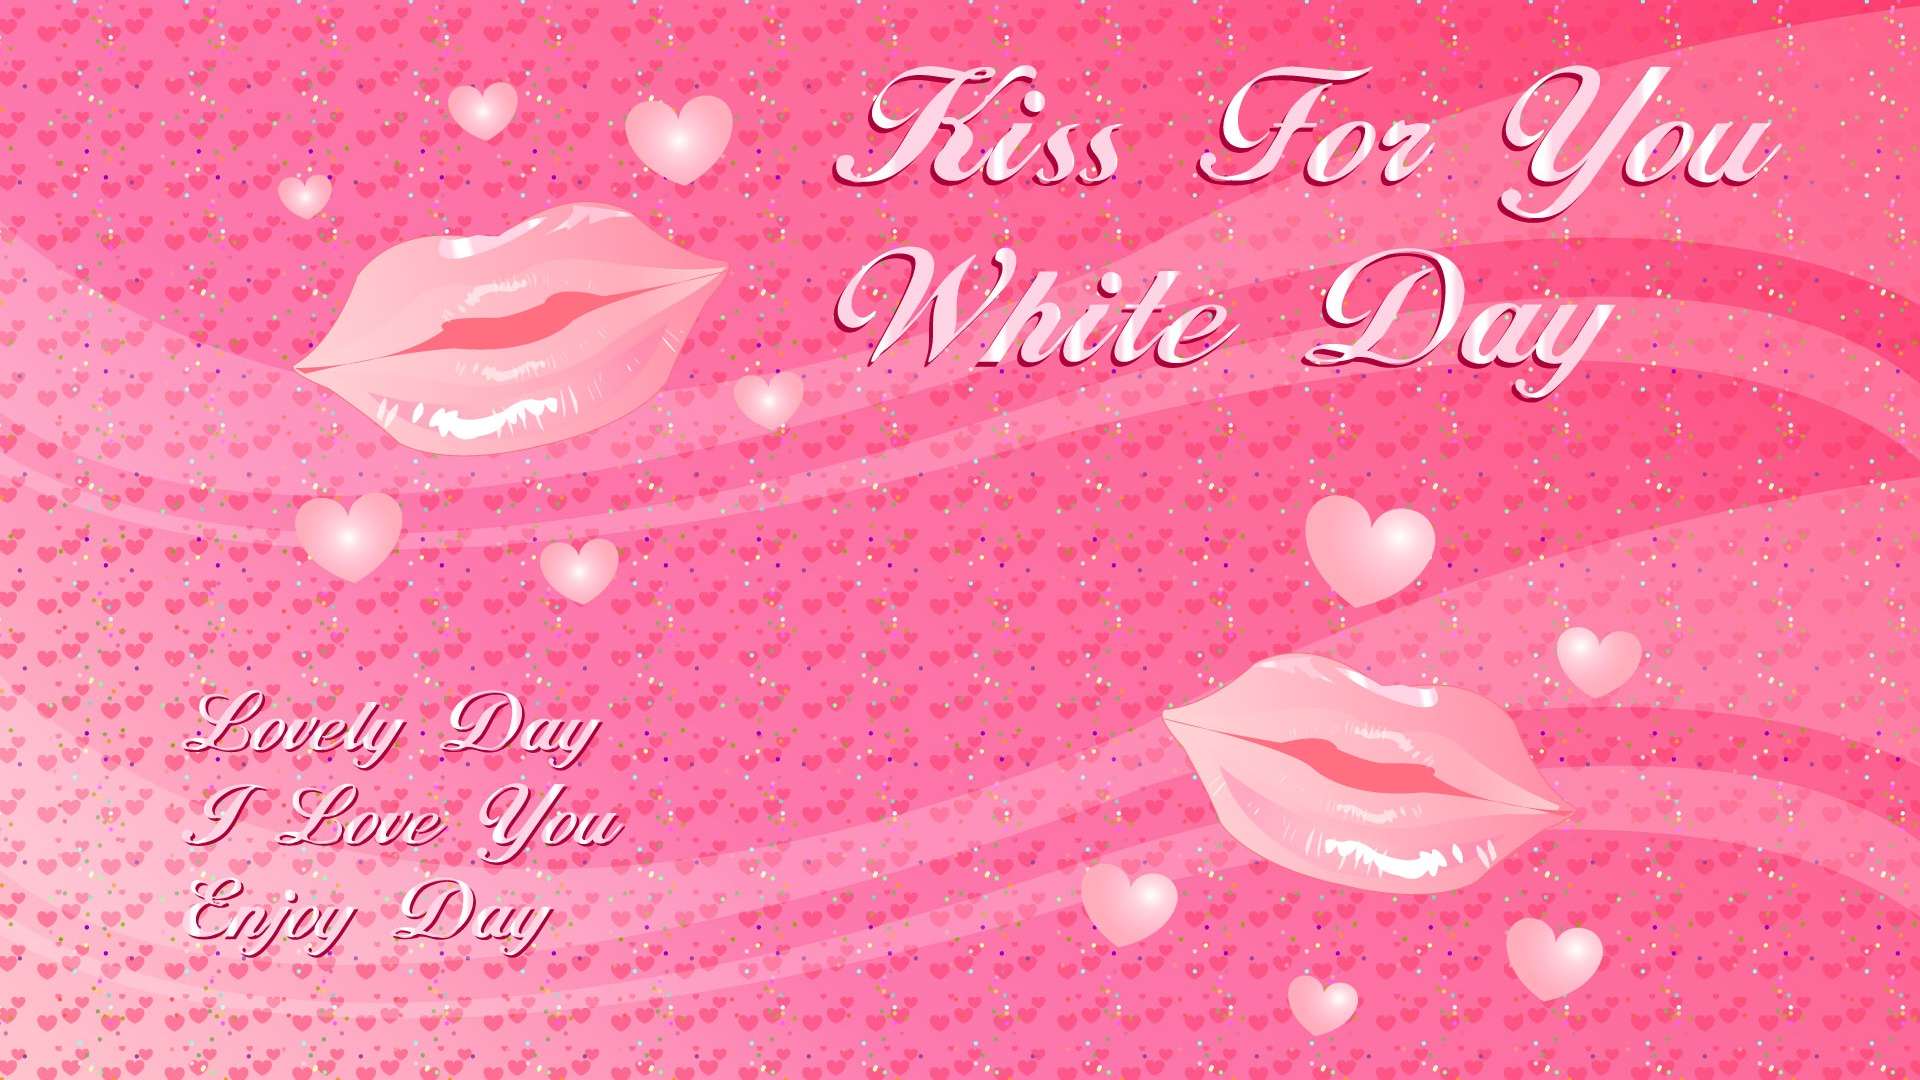 Valentine's Day Theme Wallpapers (1) #5 - 1920x1080